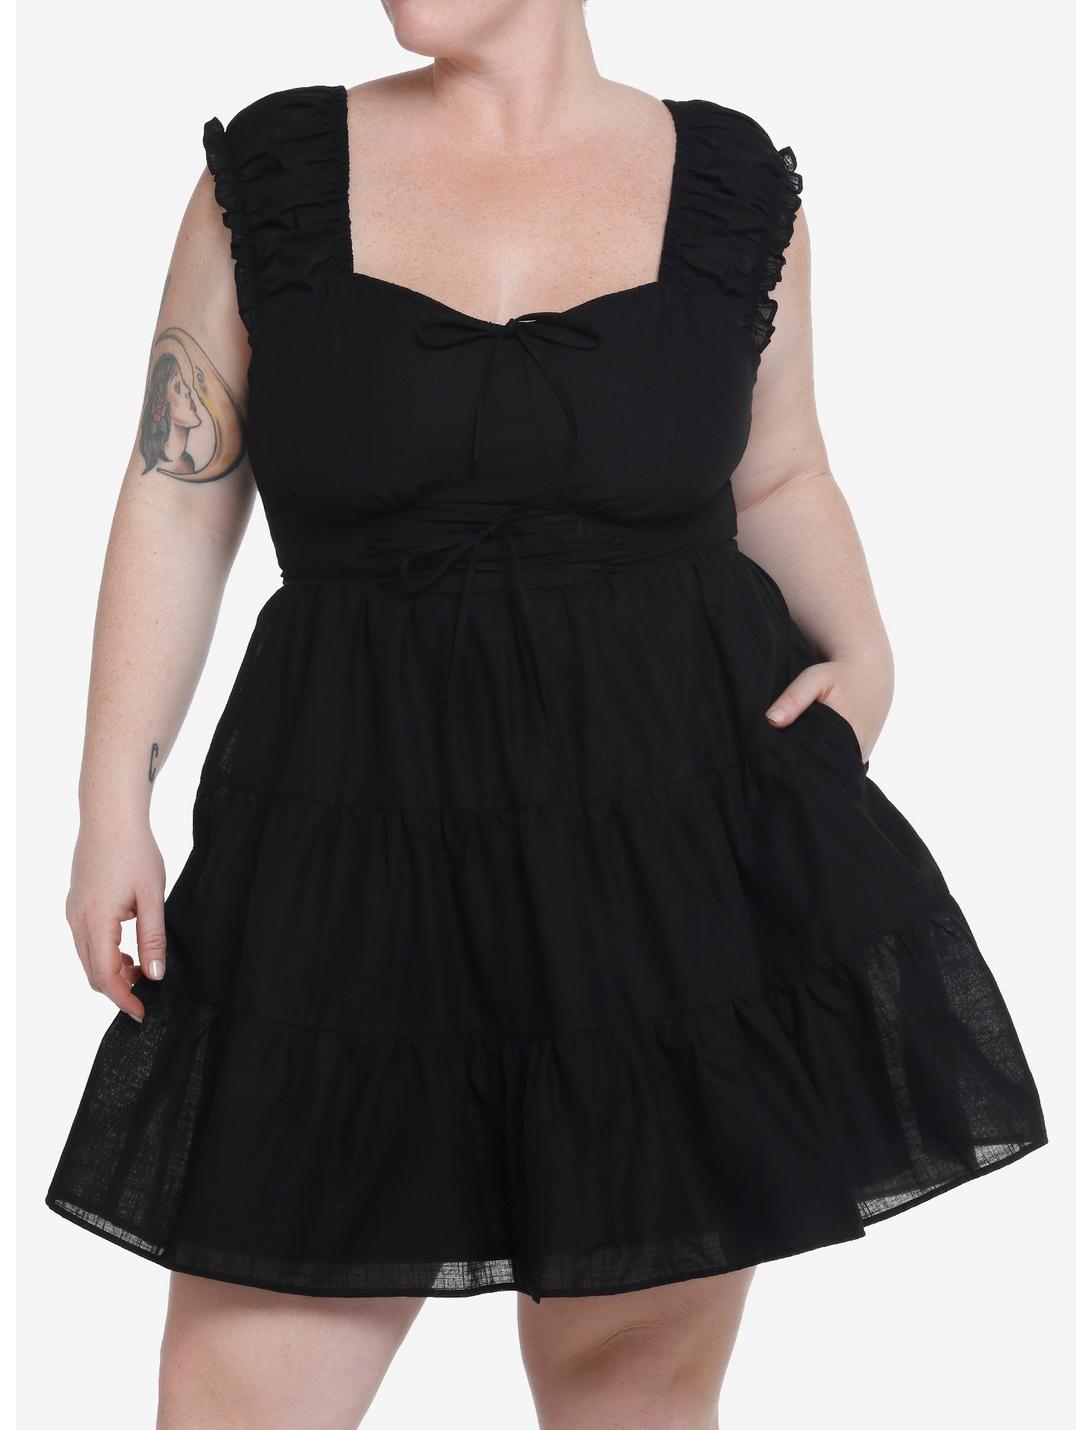 Thorn & Fable Black Tiered Dress Plus Size, BLACK, hi-res